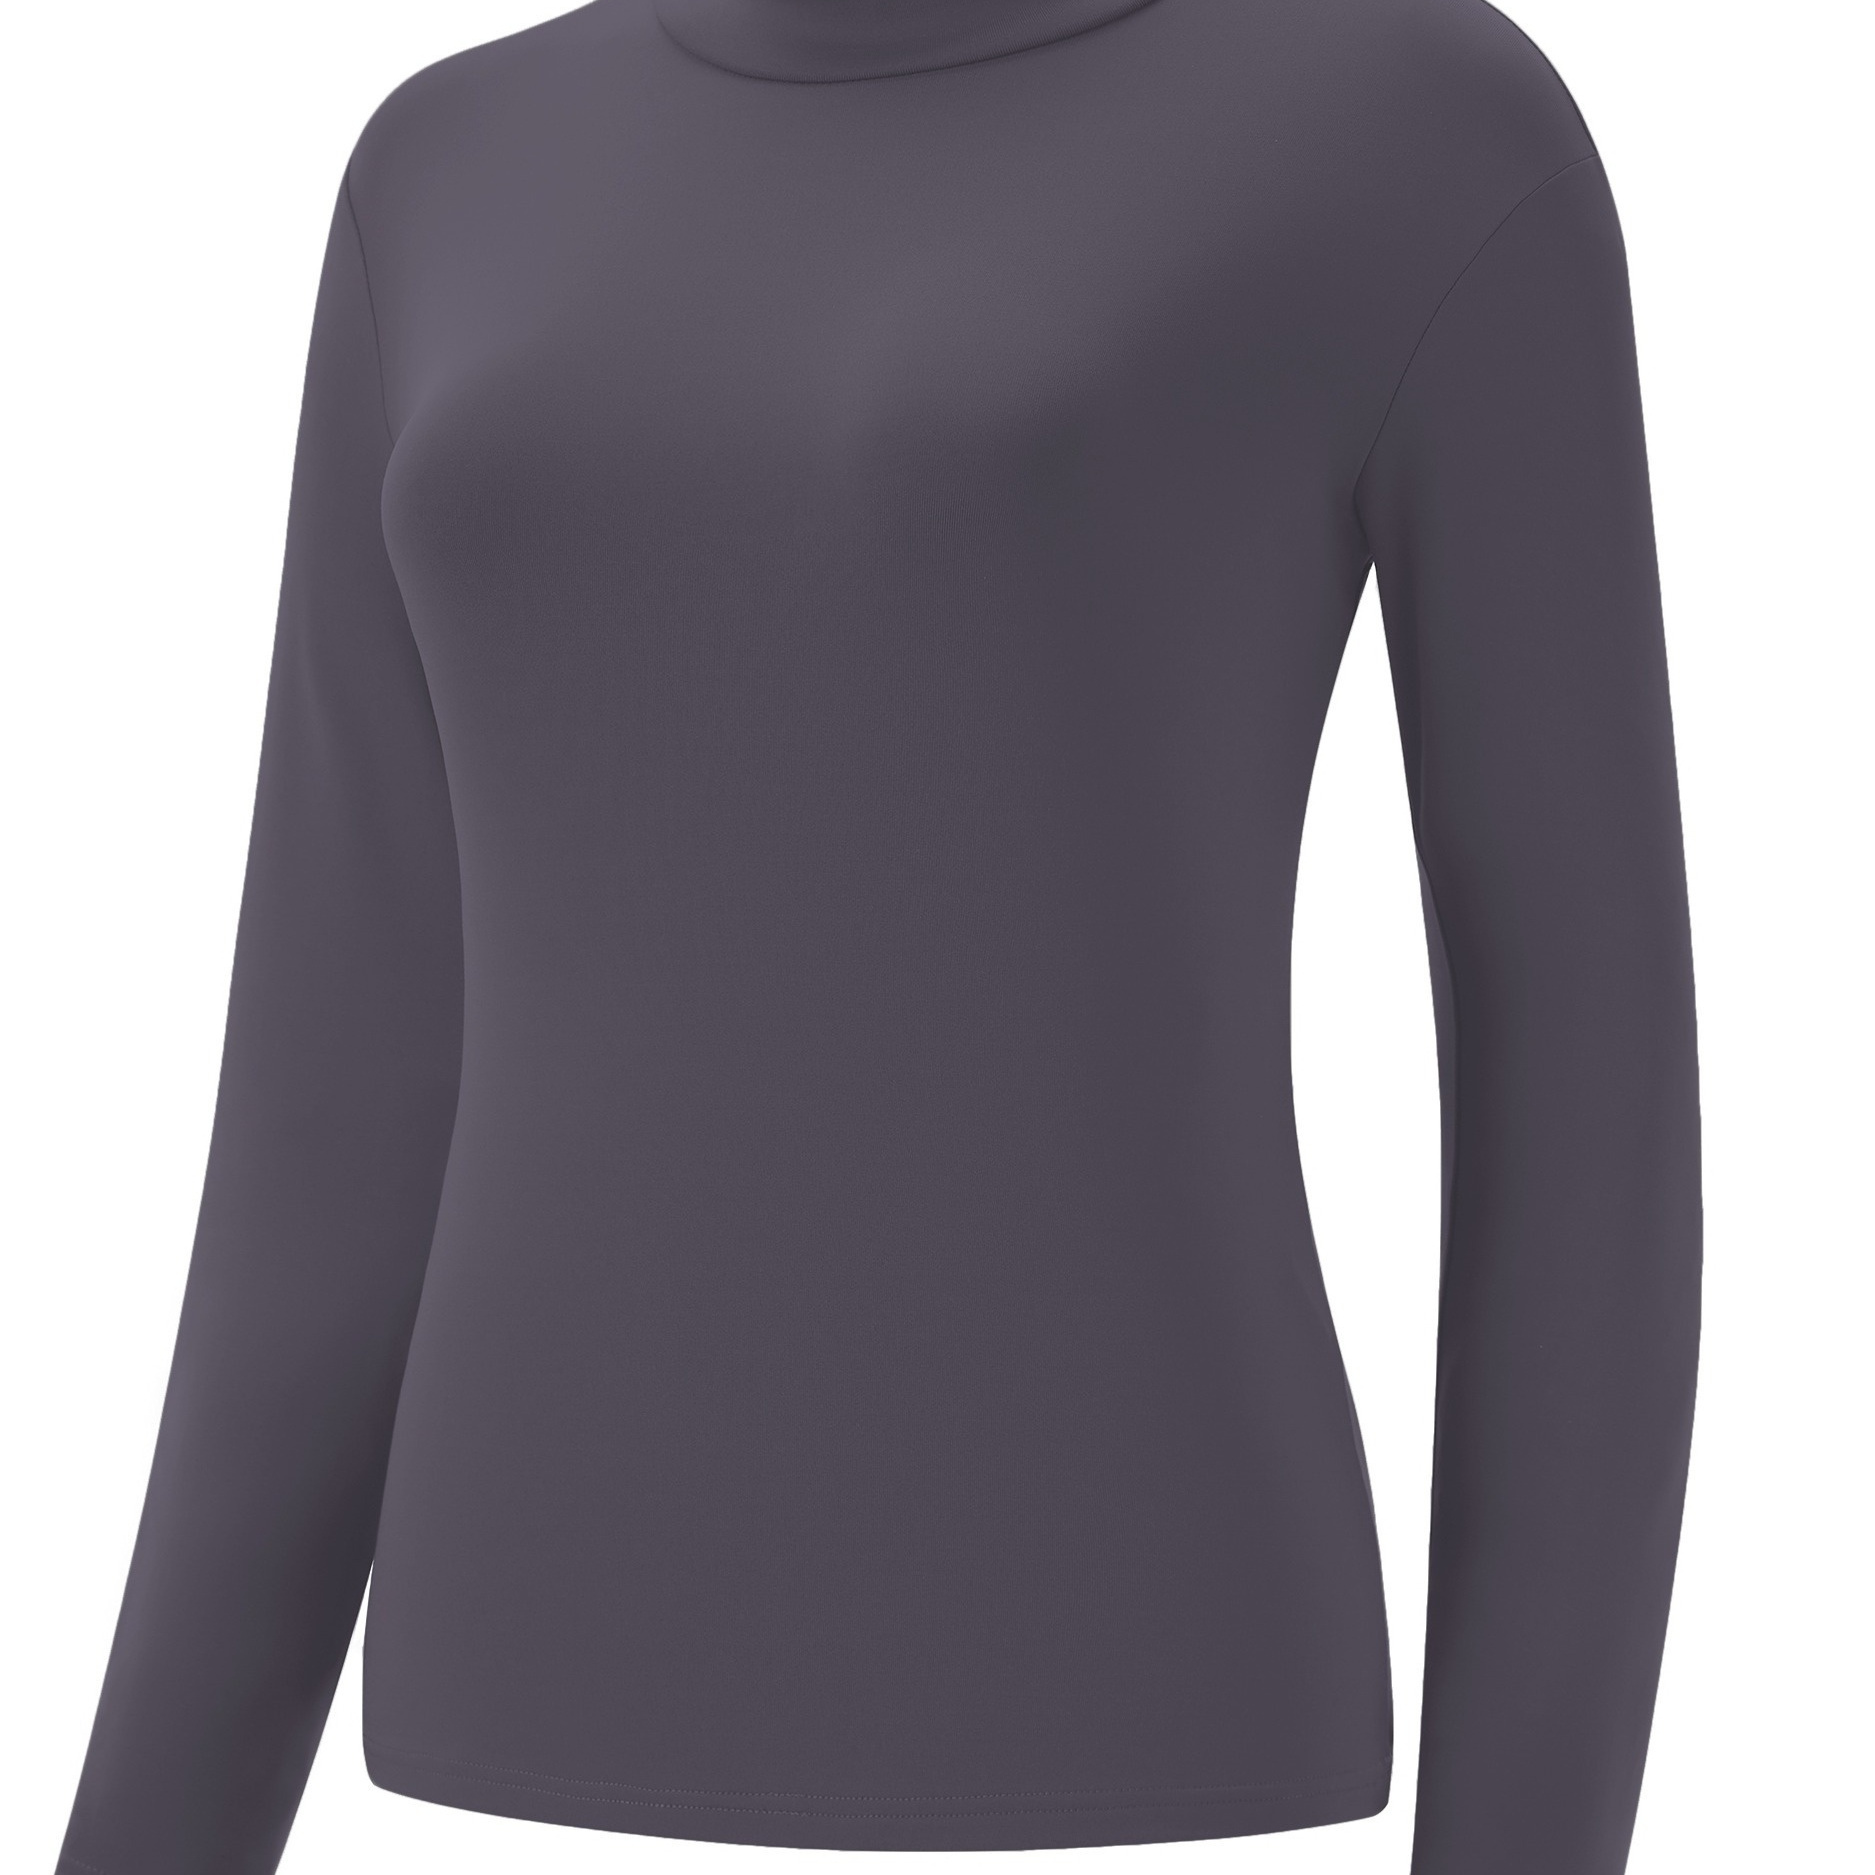 

Women's Solid Color Thermal Long Sleeve Sports Top, High Collar Warm And Comfortable Base Layer Long Sleeve Bottoming Shirt For Winter Ski Hiking, Women's Clothing